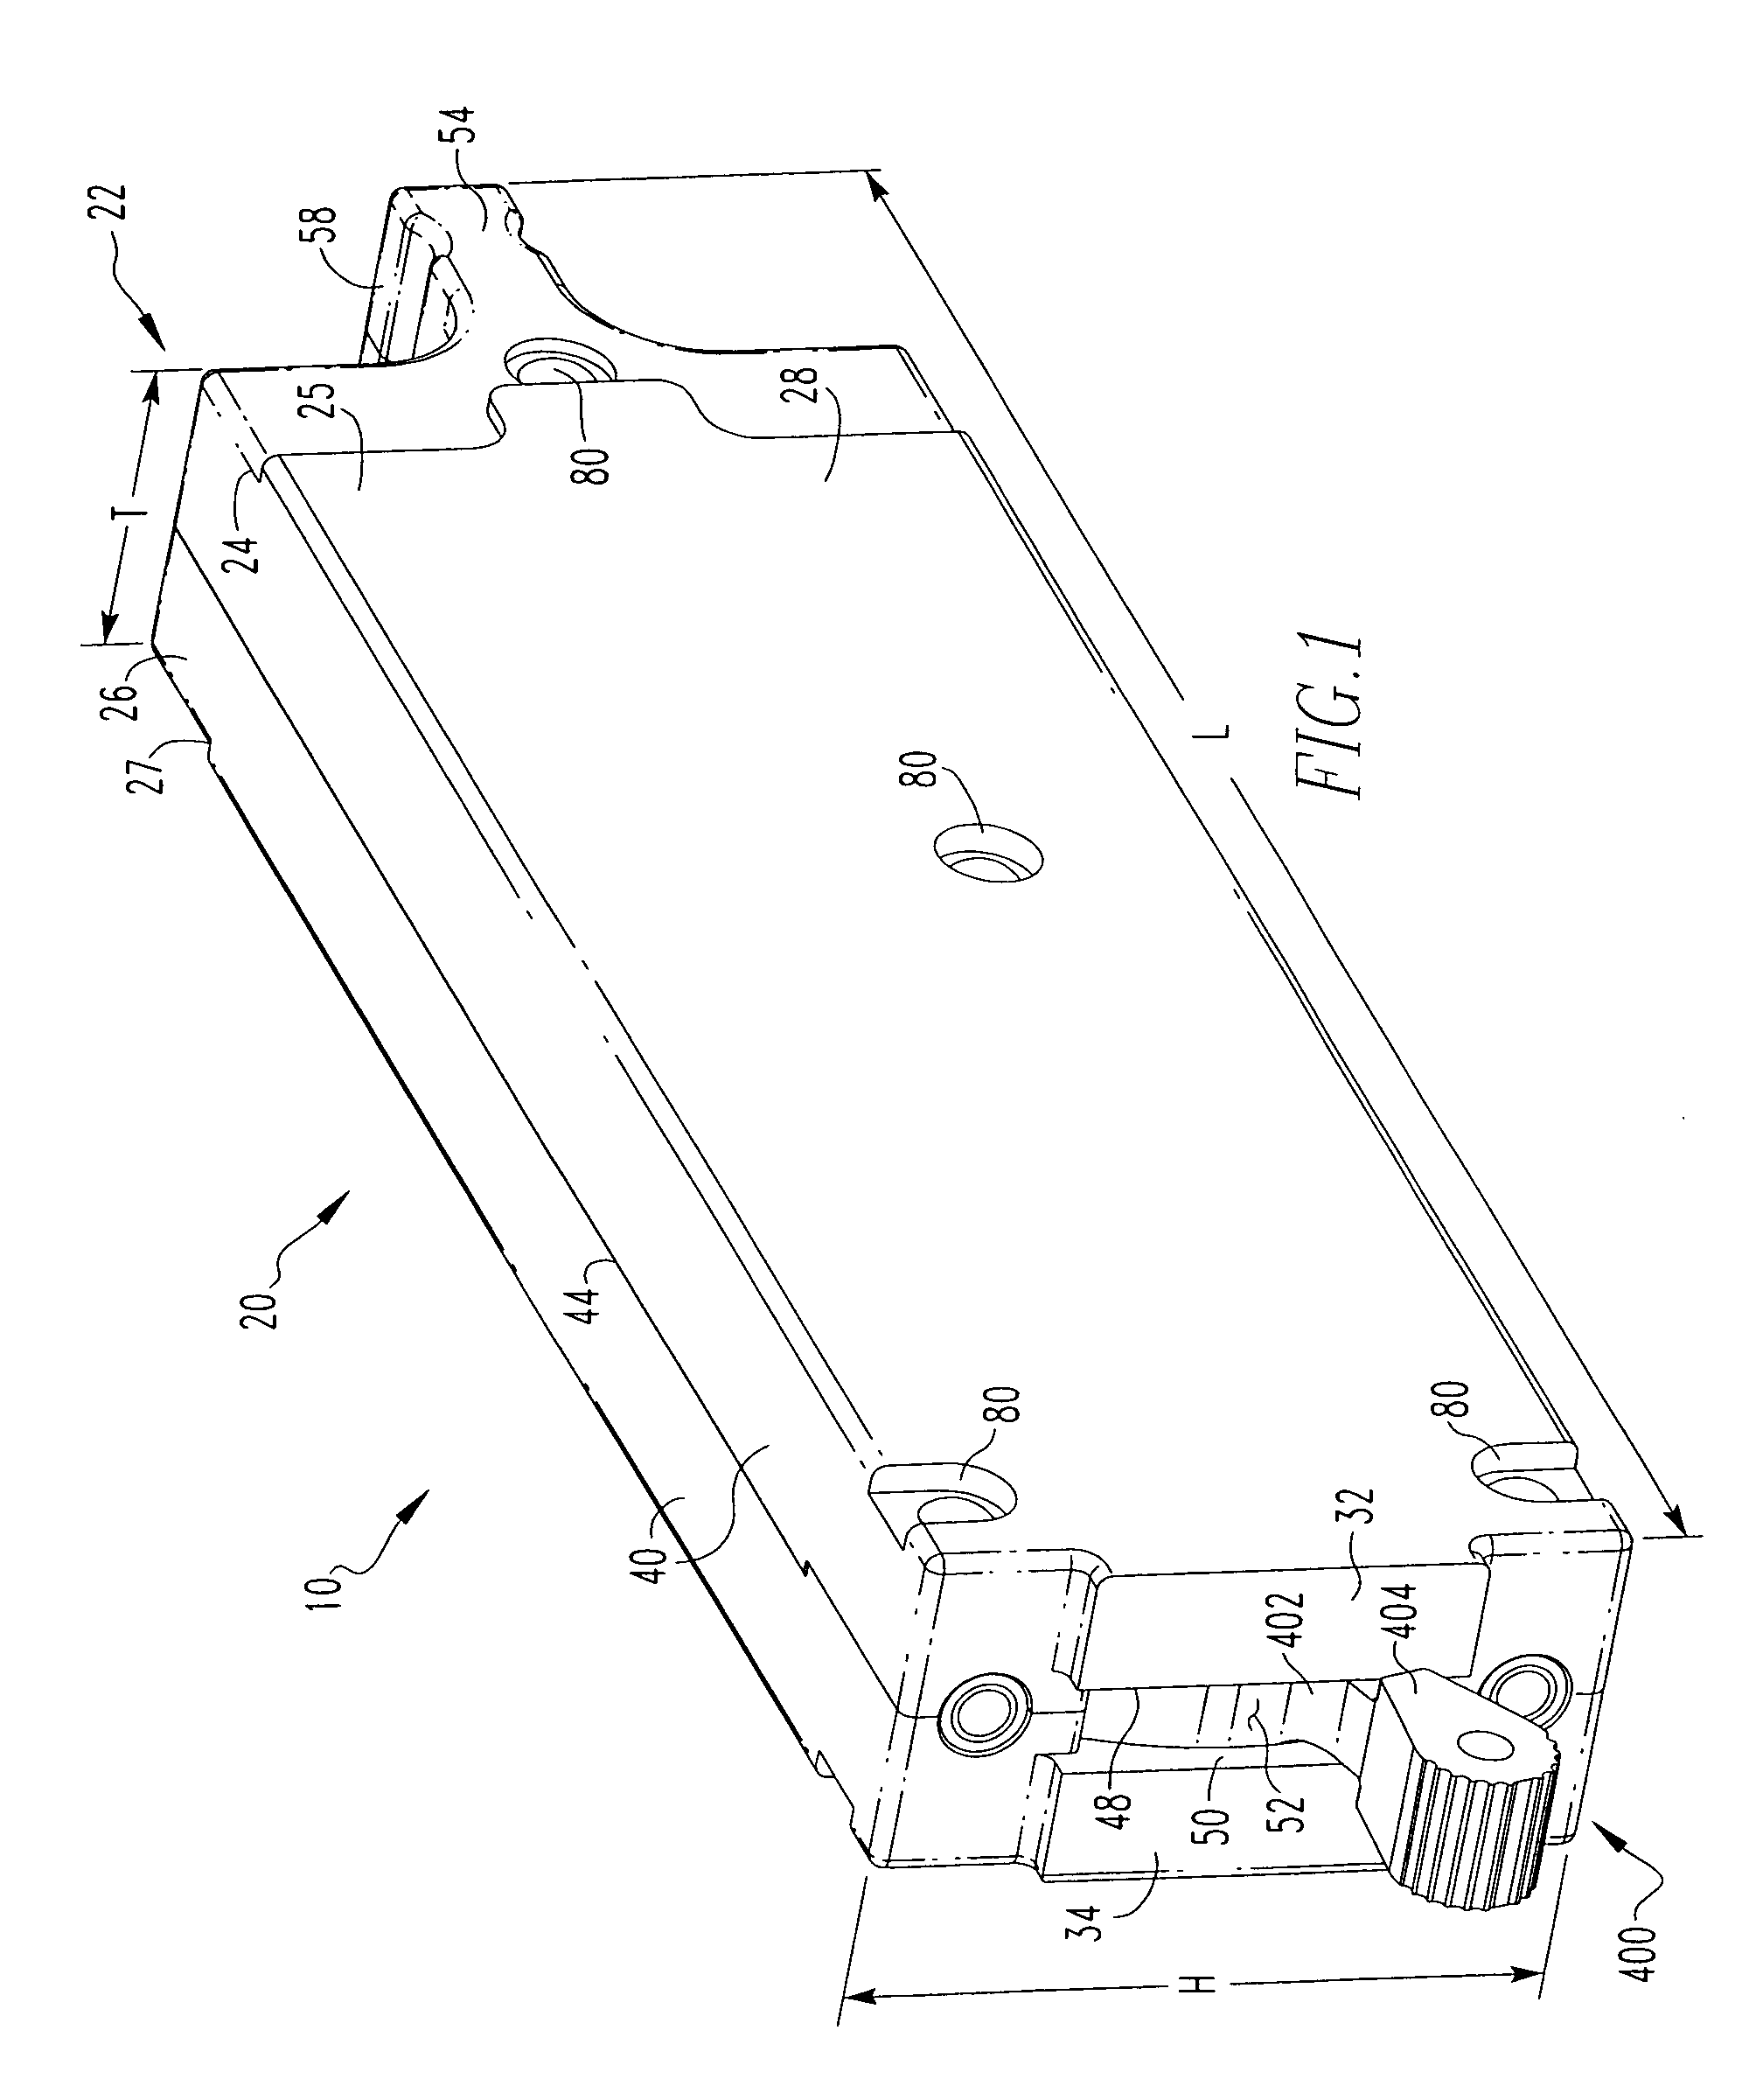 Handle assembly having an integral slider therefor and electrical switching apparatus employing the same